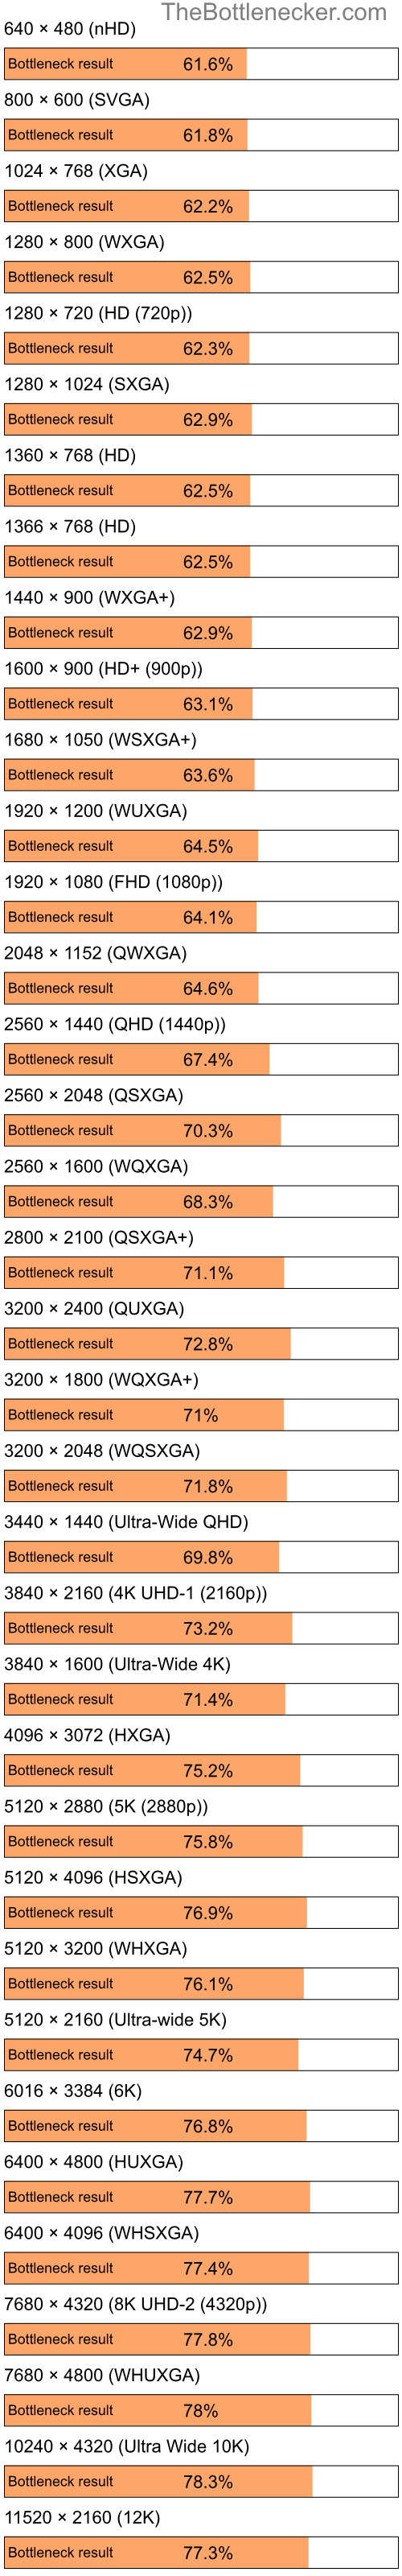 Bottleneck results by resolution for Intel Pentium 4 and NVIDIA GeForce 9100M G in Processor Intense Tasks